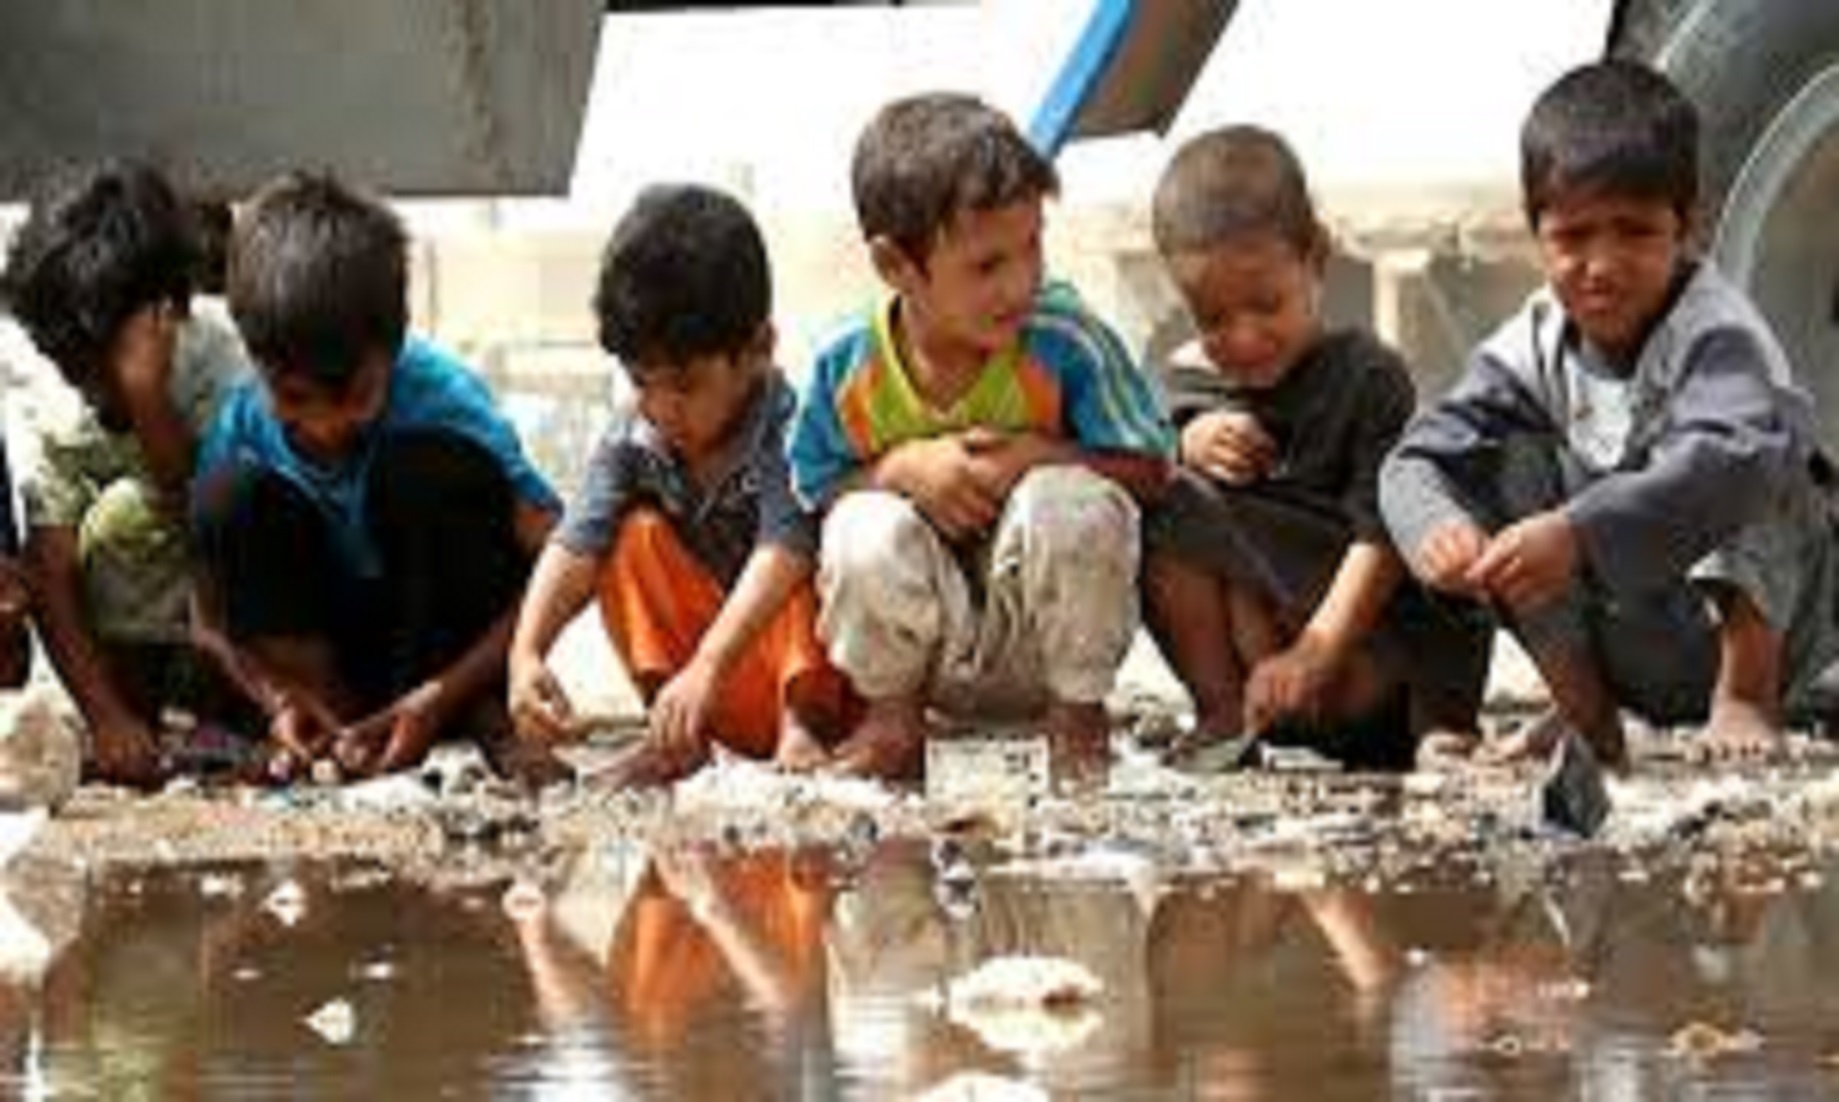 Iraq Reported 13 Cases Of Cholera